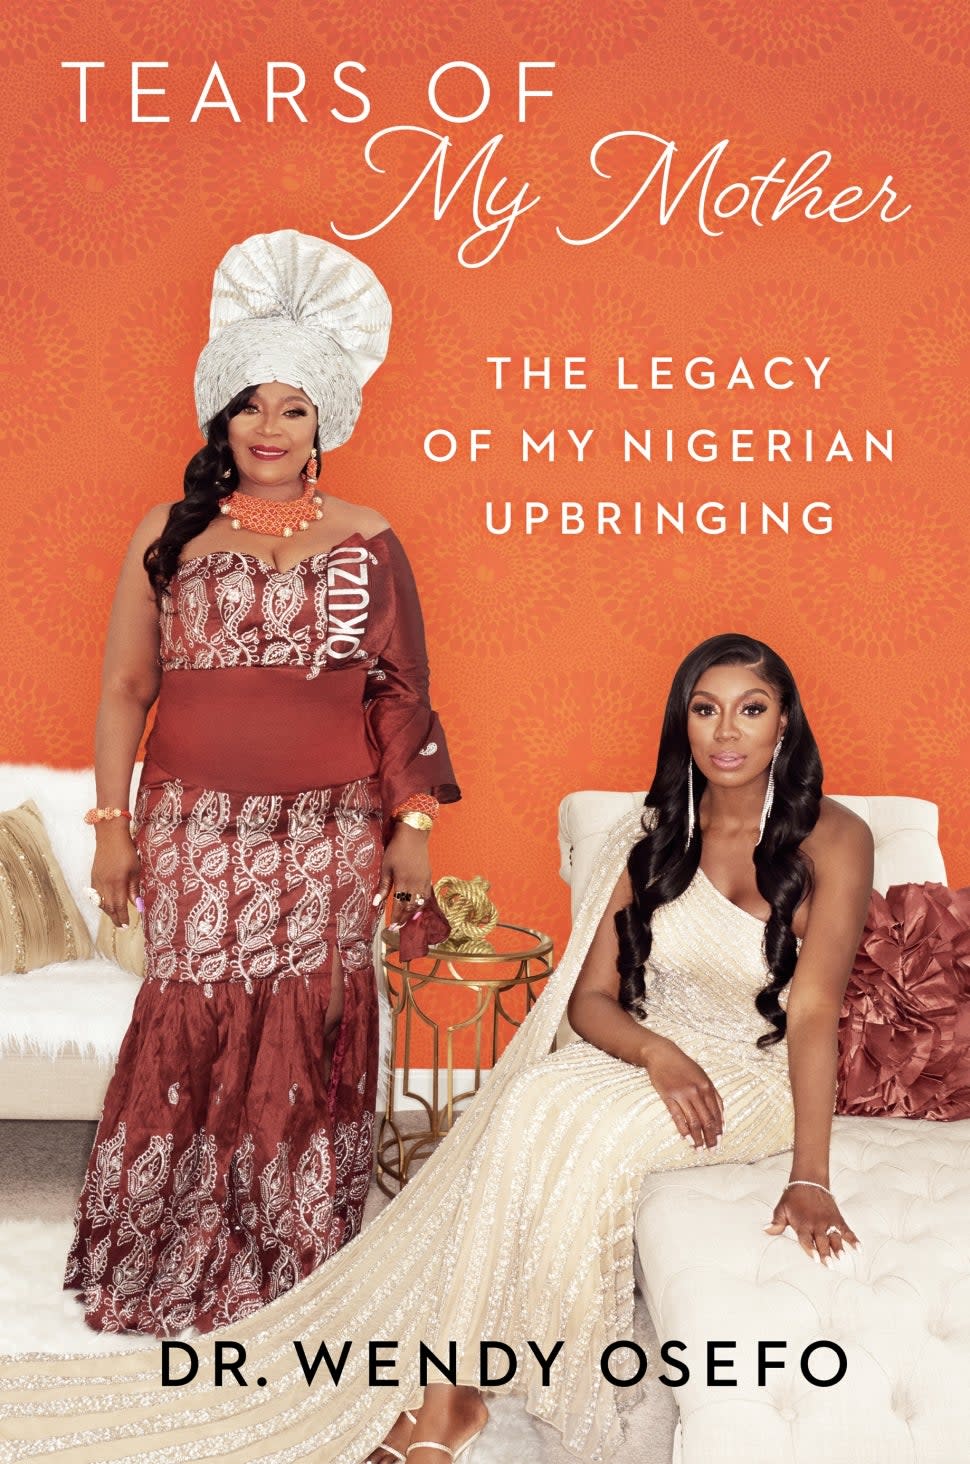 The cover for Wendy Osefo's memoir, Tears of My Mother: The Legacy of My Nigerian Upbringing